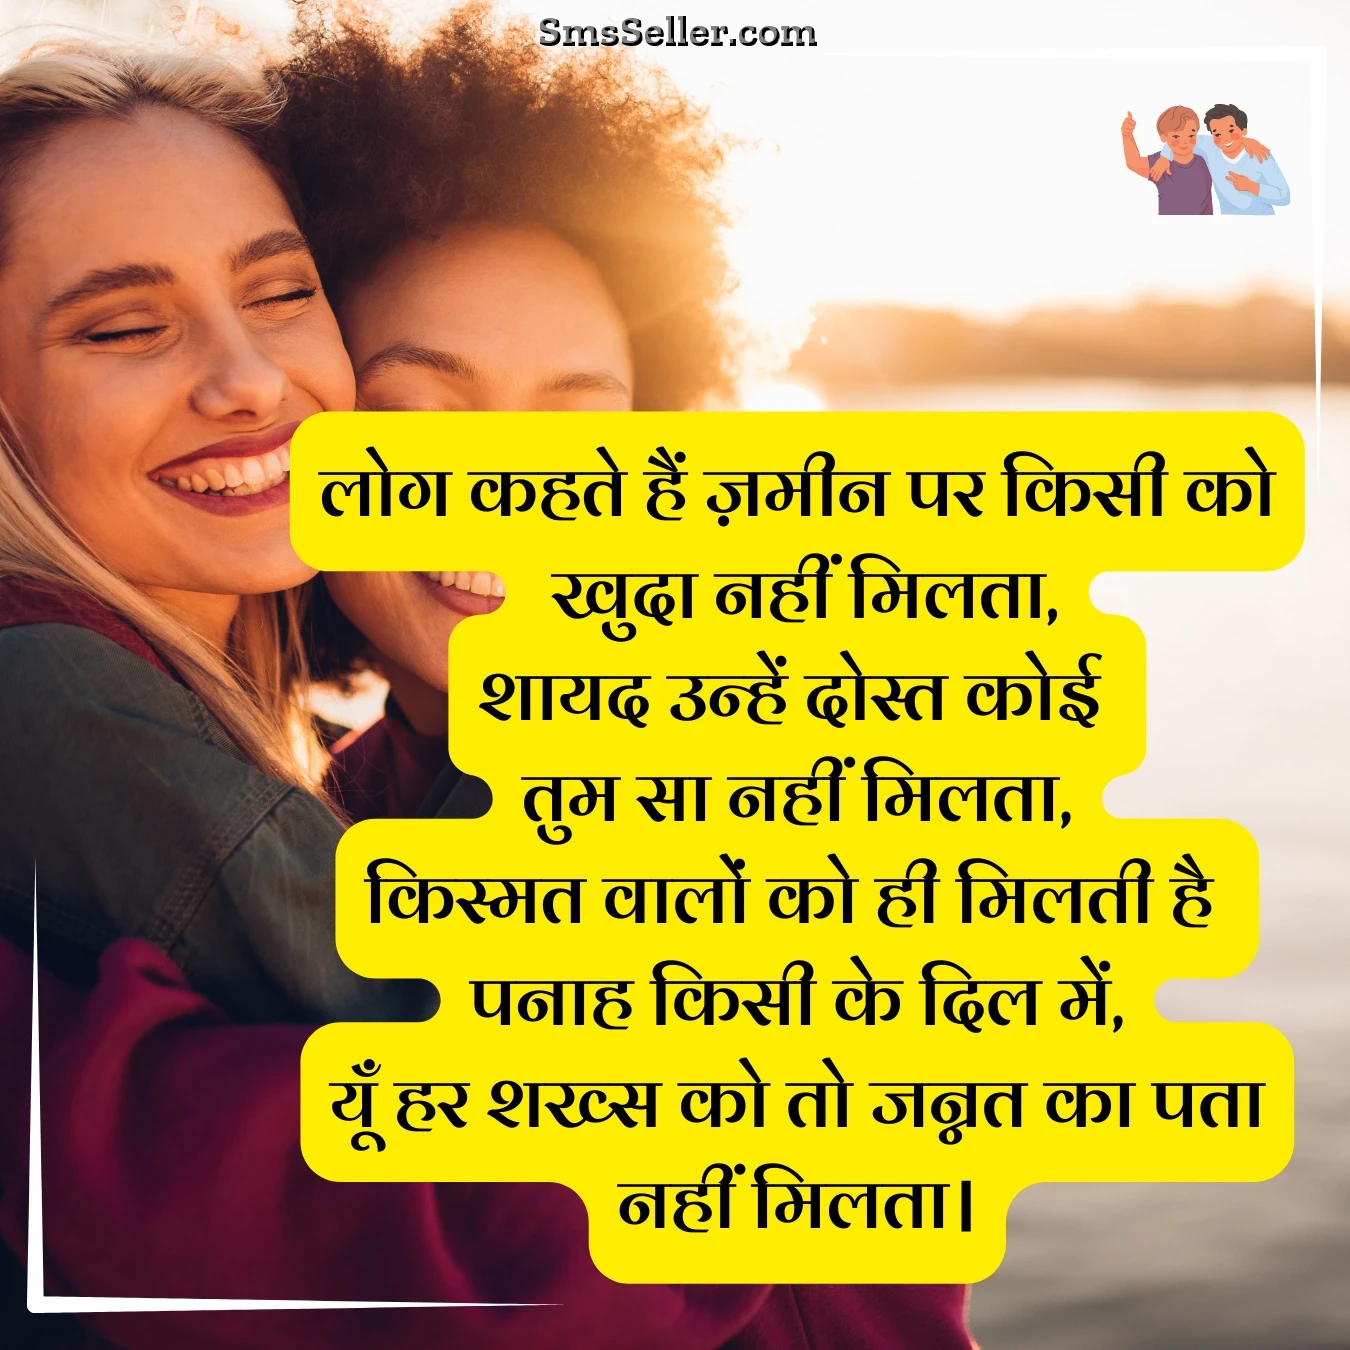 dosti lines deep connections zameen as friends